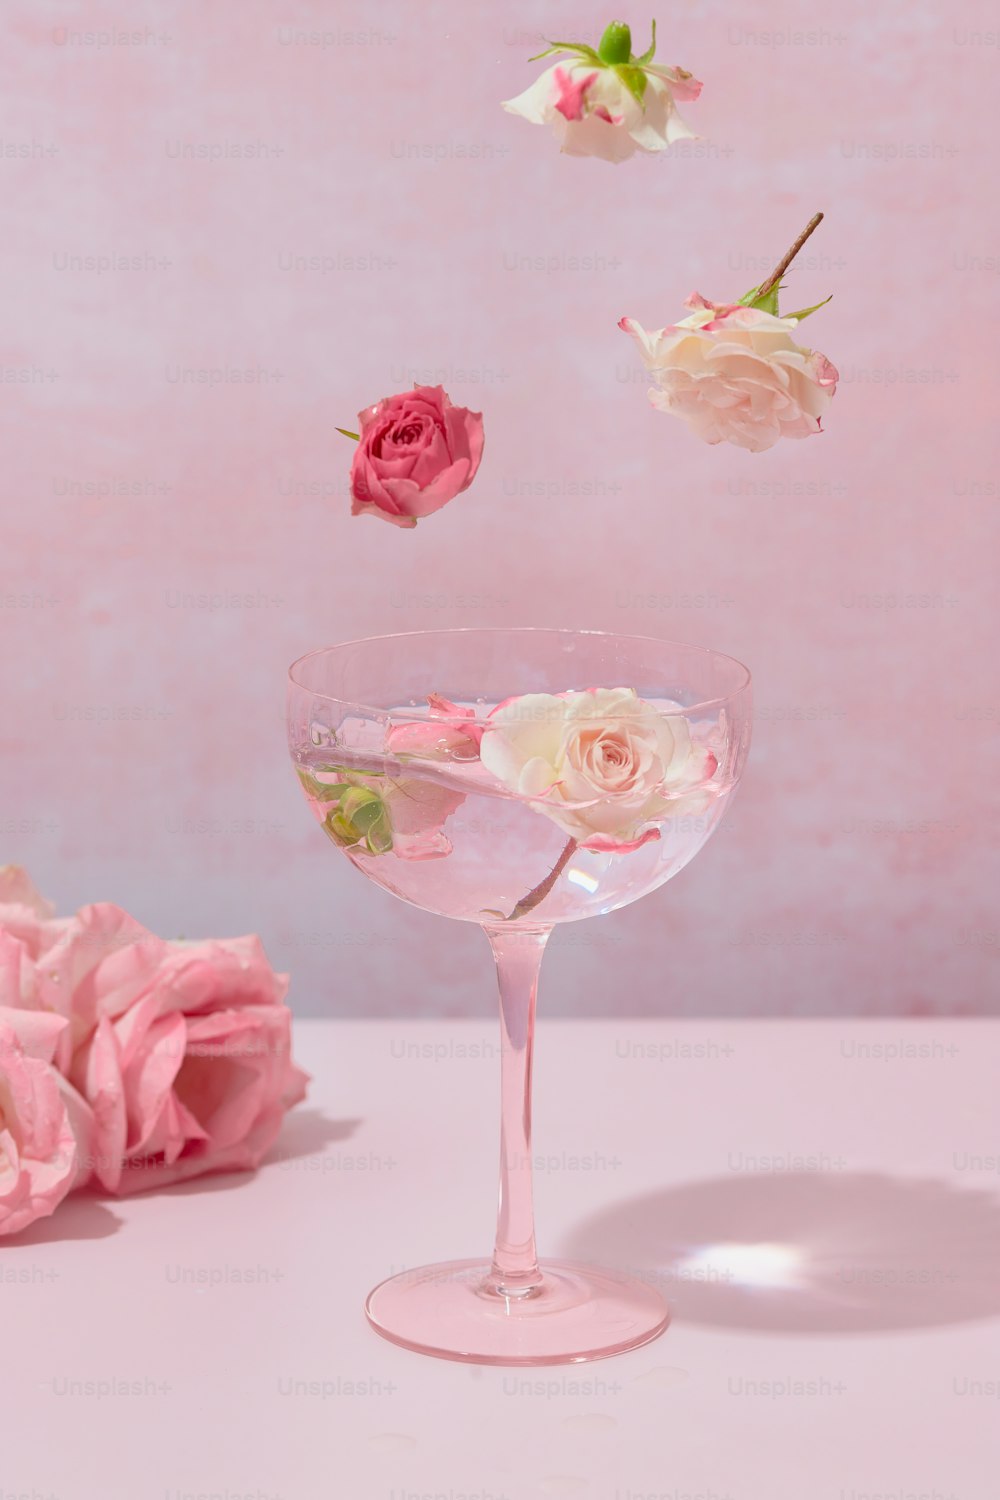 a glass filled with liquid and flowers floating in the air